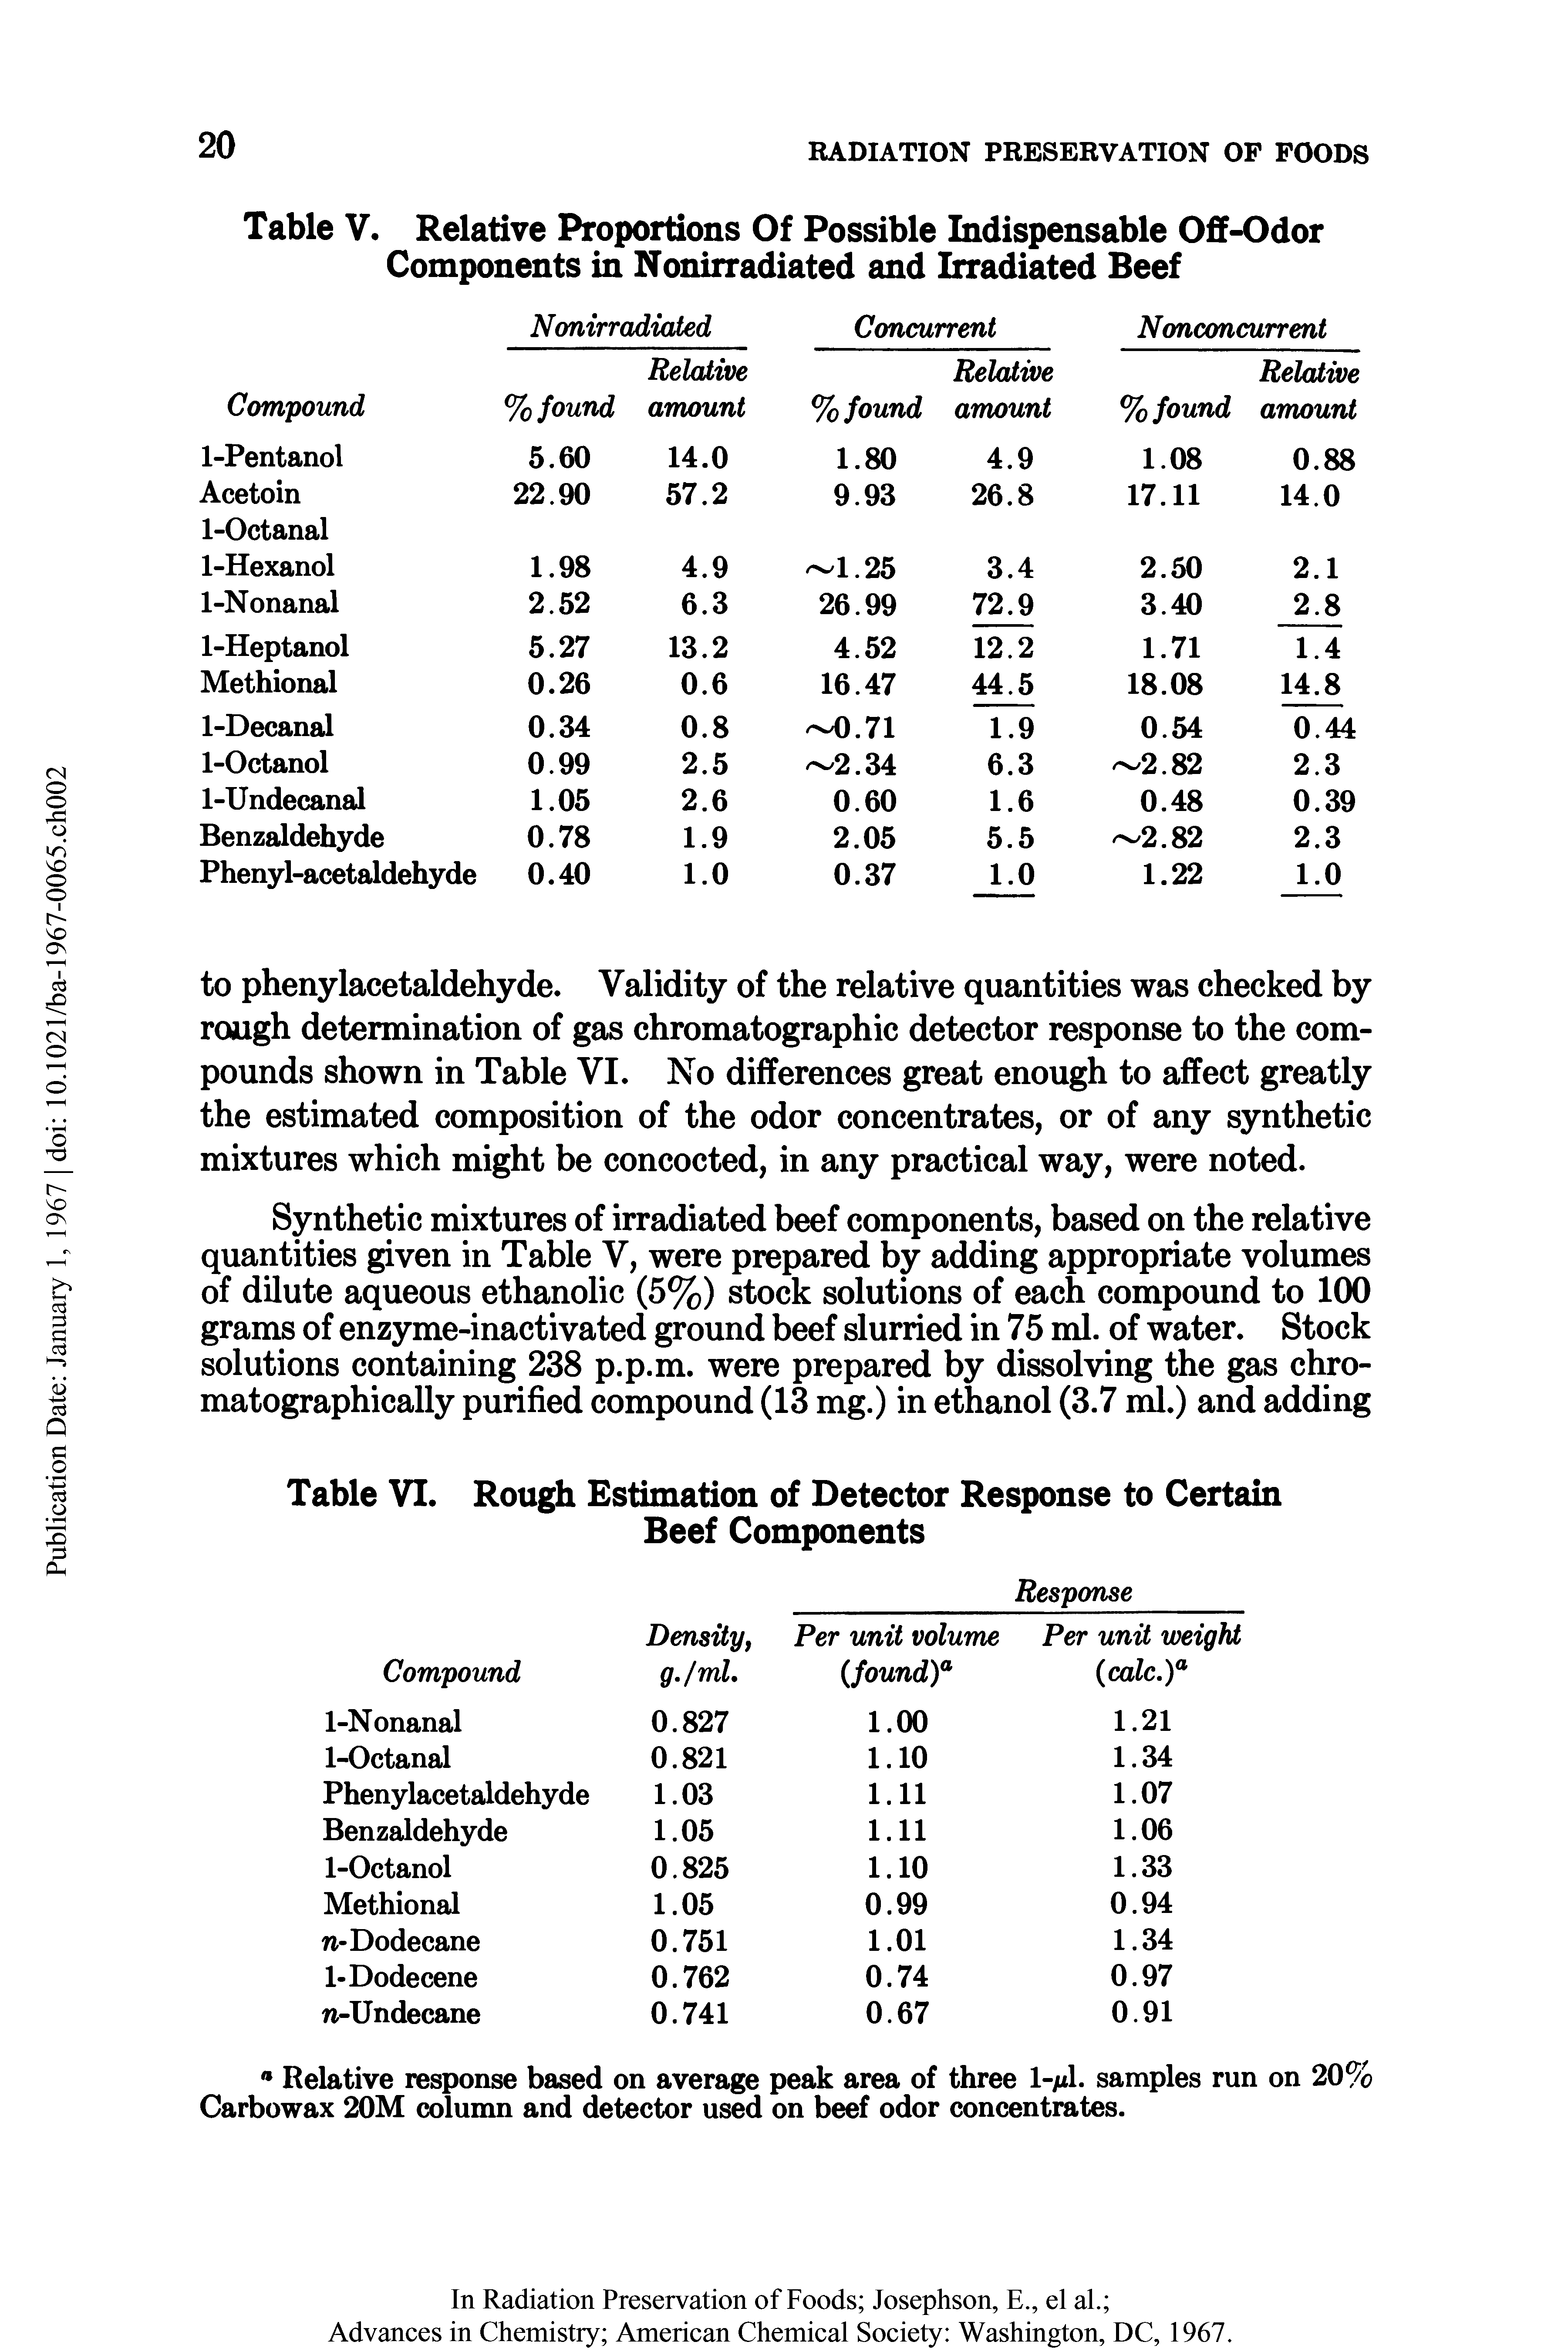 Table V. Relative Proportions Of Possible Indispensable Off-Odor Components in Nonirradiated and Irradiated Beef...